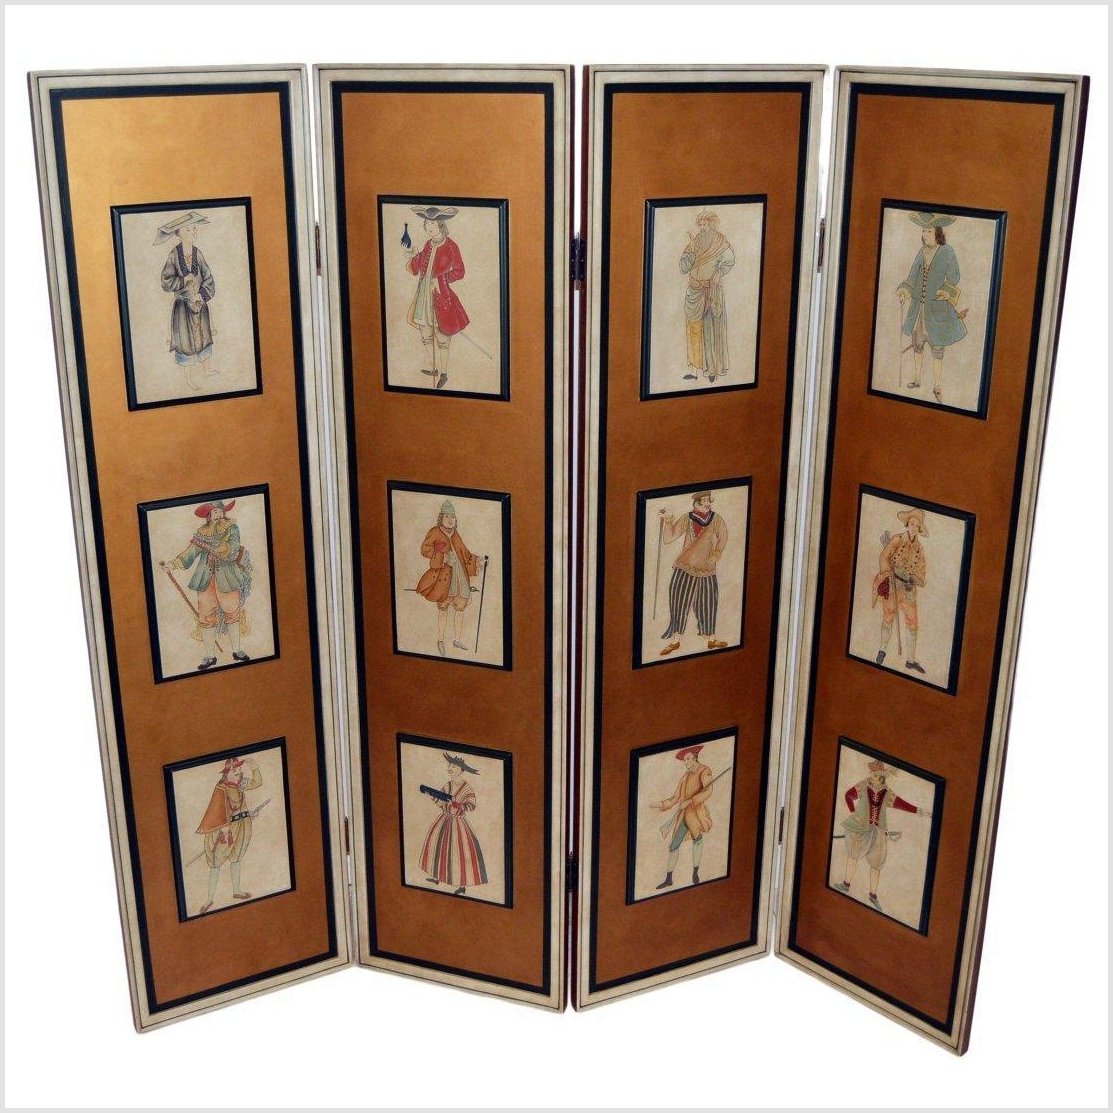 4-Panel Screen with Individual Frames of Men from Different Nations-YN2855 / YN2881-1. Asian & Chinese Furniture, Art, Antiques, Vintage Home Décor for sale at FEA Home